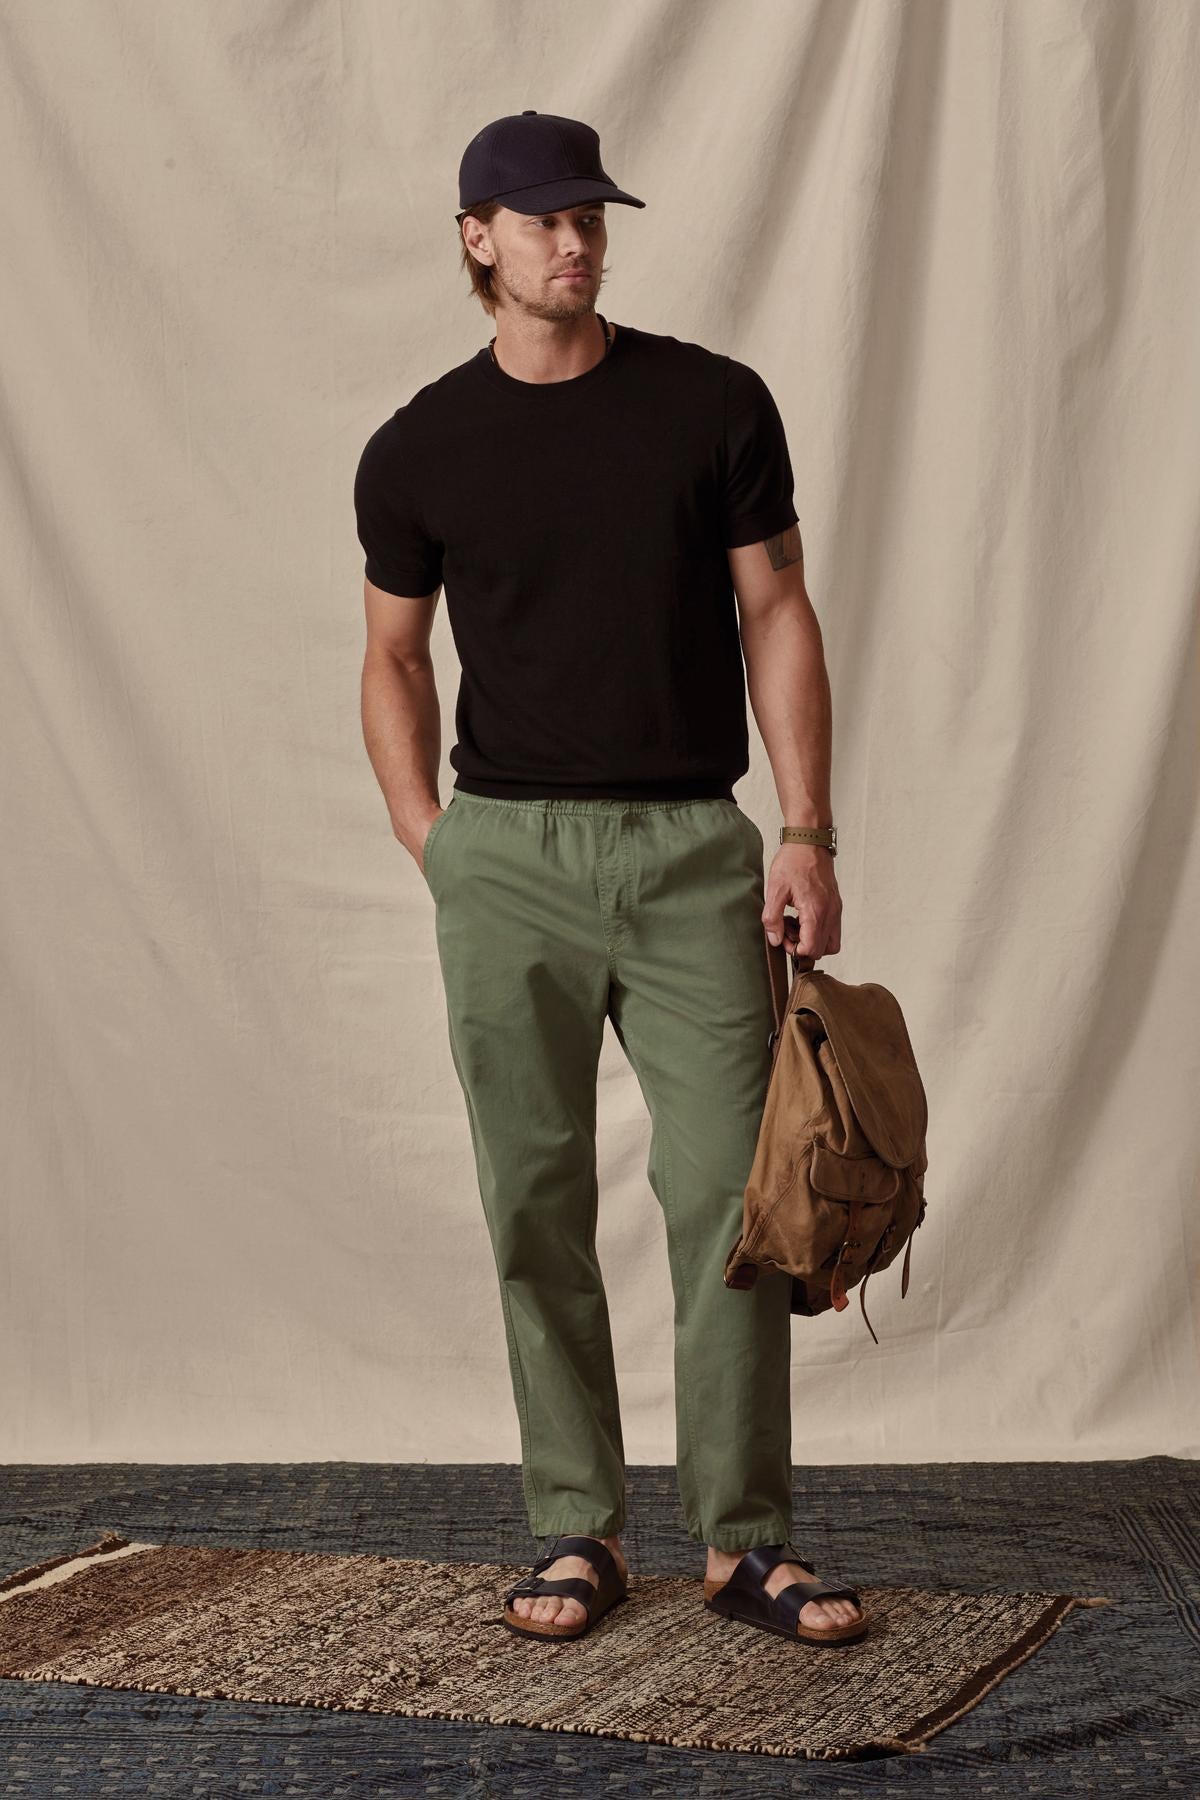 Man in a casual black t-shirt and green Branson Pant by Velvet by Graham & Spencer with an elastic drawstring waist holding a backpack, wearing a cap and sandals, standing against a draped backdrop.-36443154383041